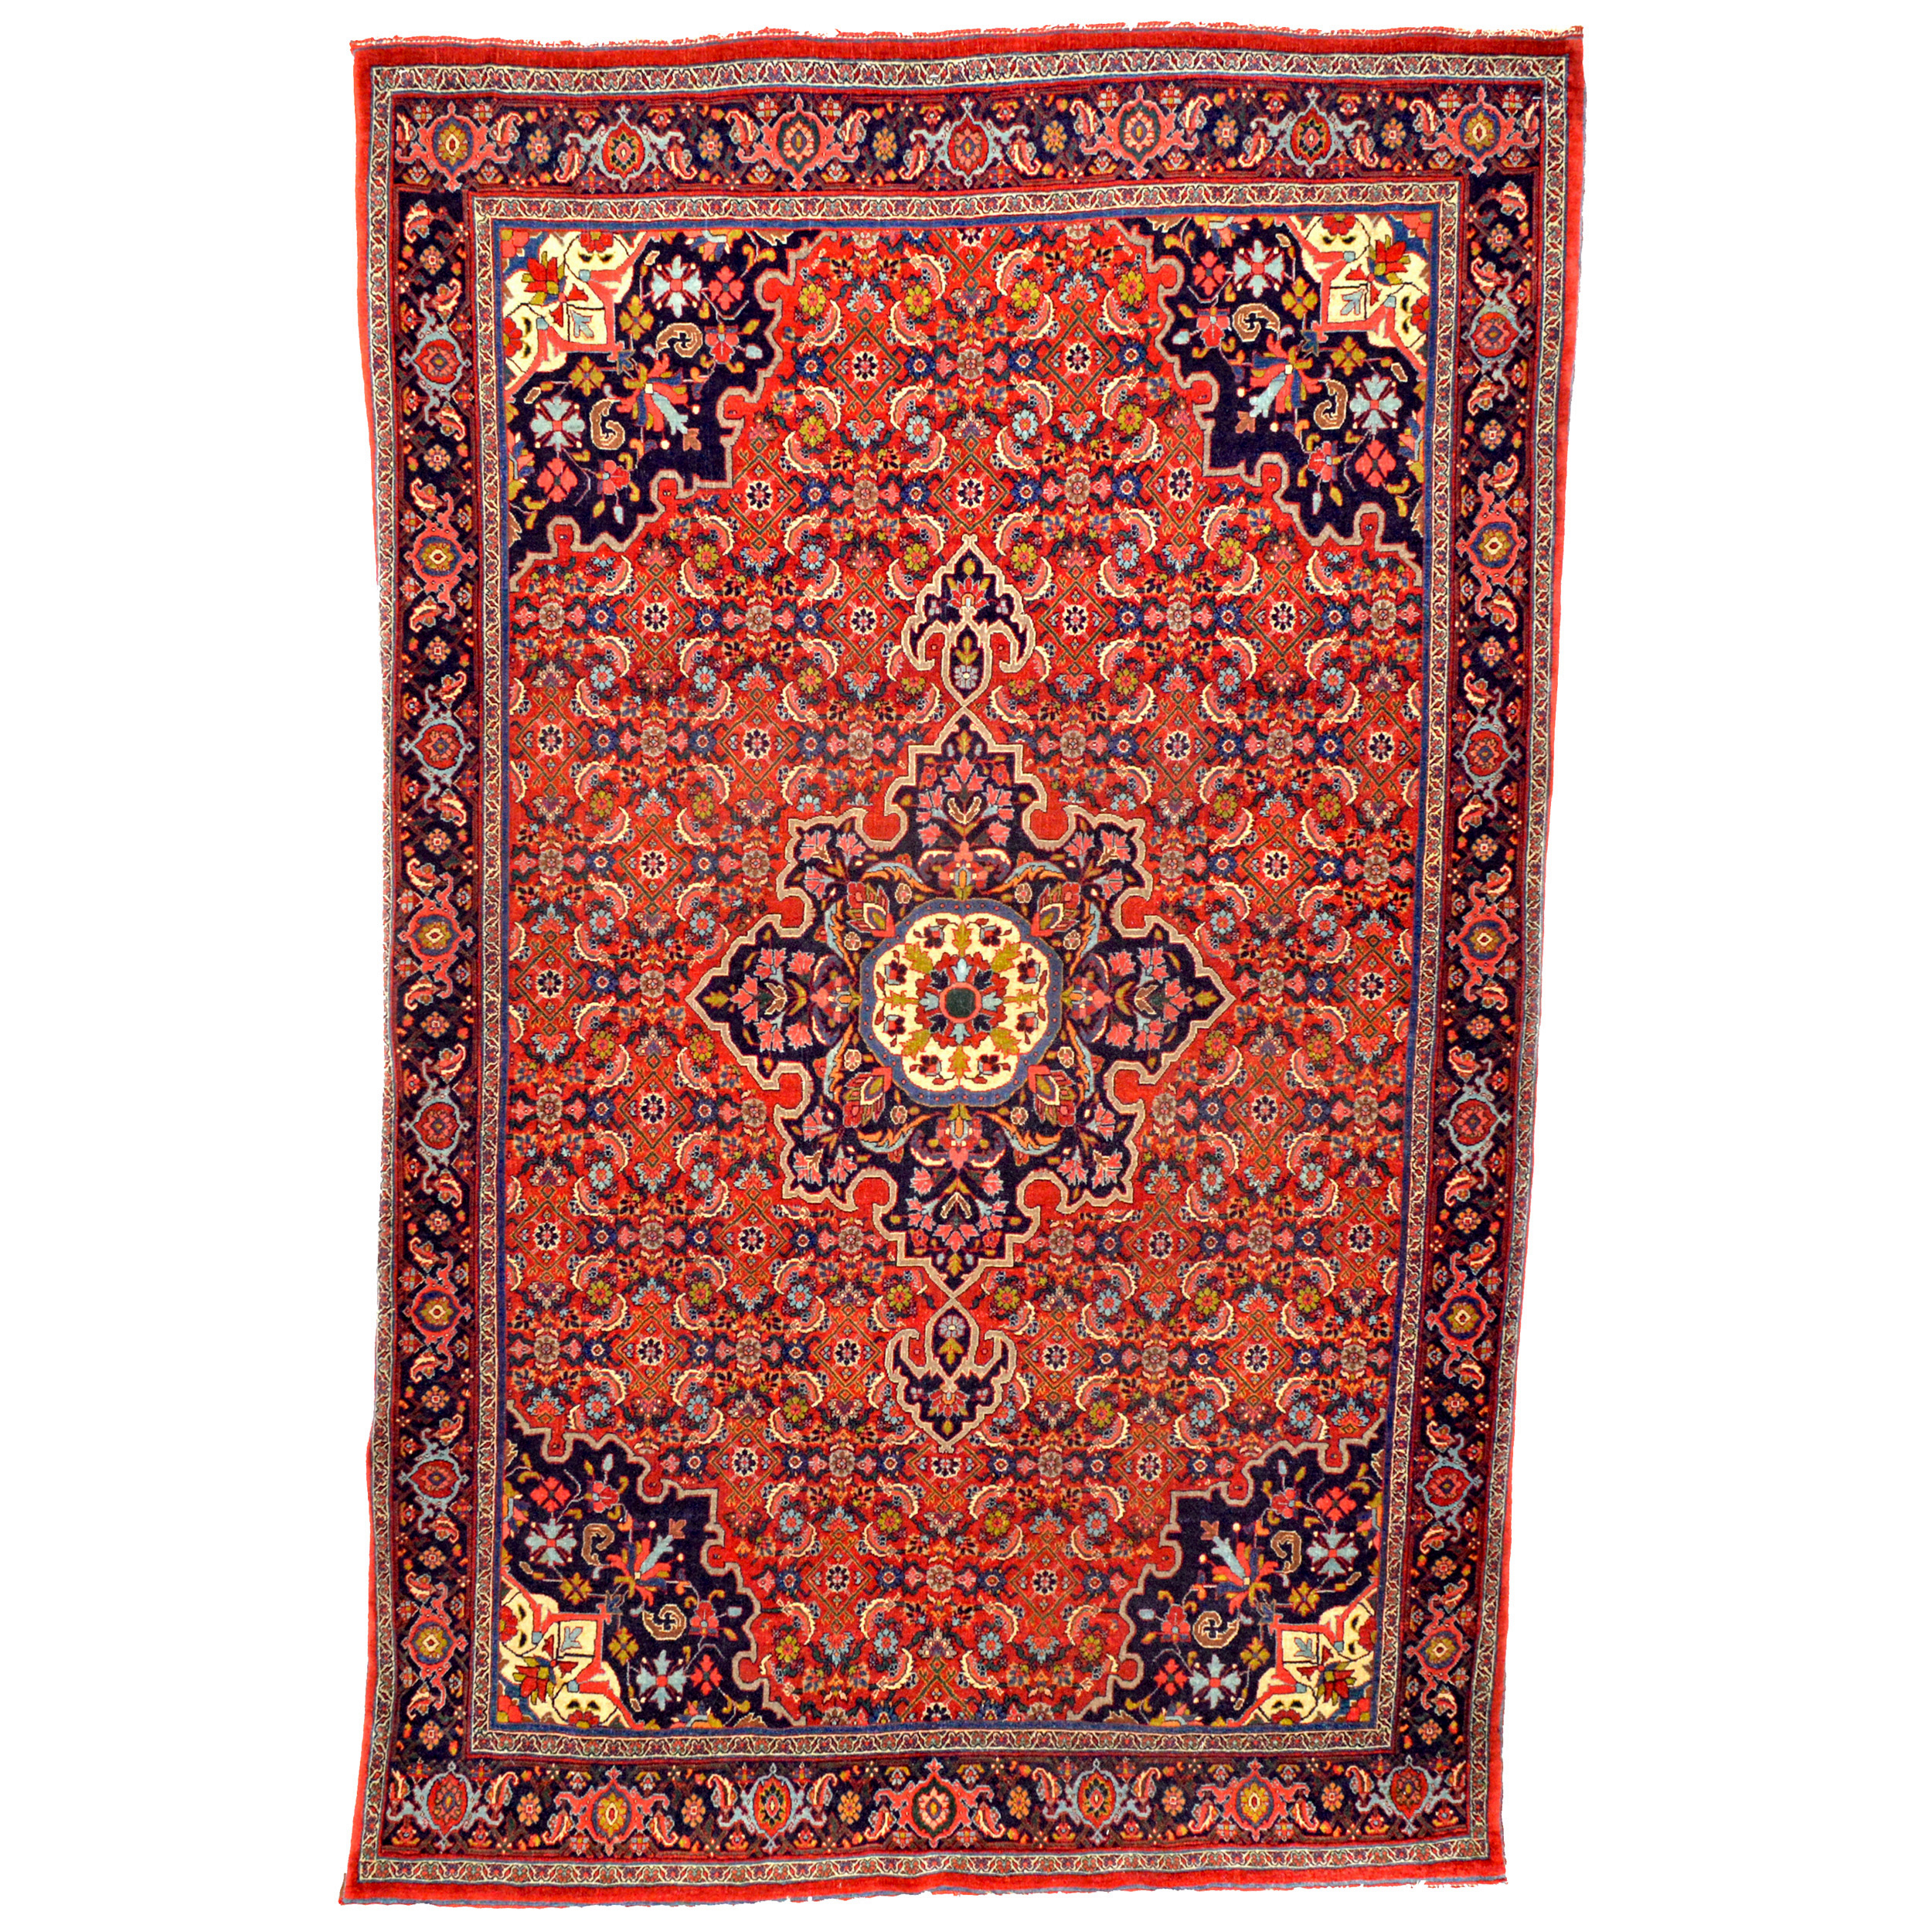 A fine antique Persian Halvai Bidjar rug. The red field is decorated with the classical Herati design with a navy medallion and border - Douglas Stock Gallery, antique rugs Boston area, antique Persian rugs New England